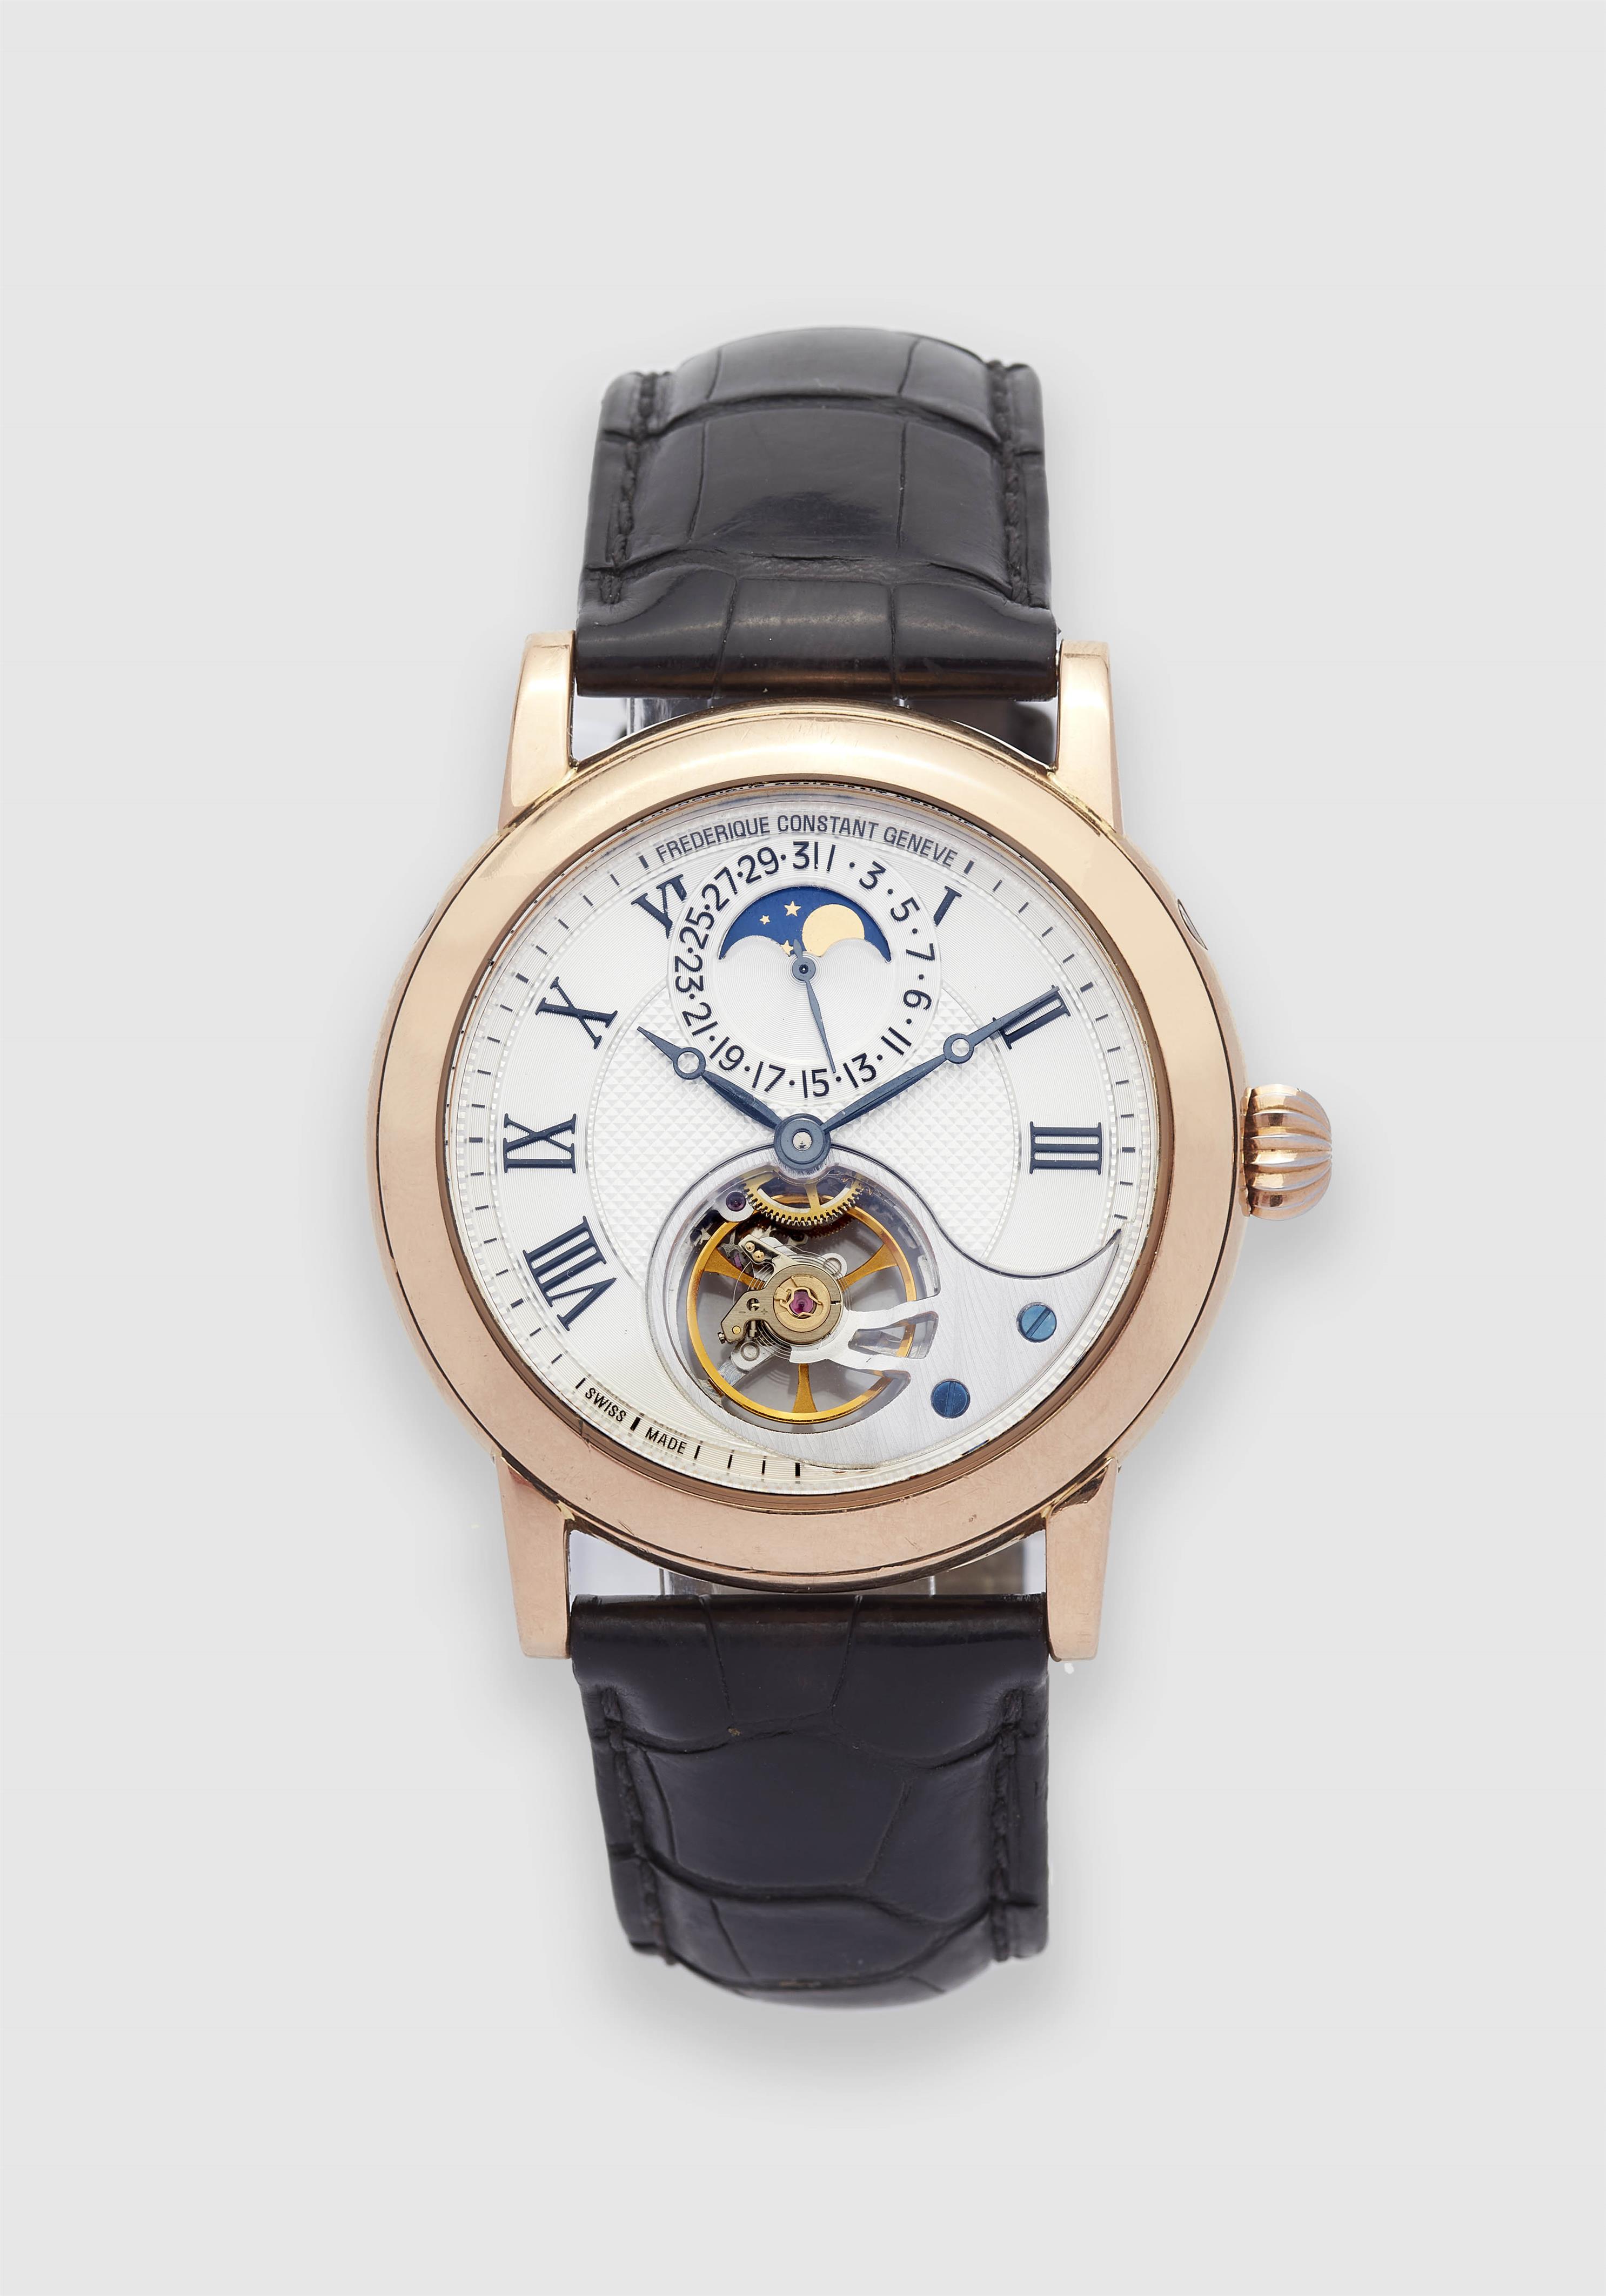 Frederique Constant Heart Beat Manufacture Limited Edition 059/188 - image-1